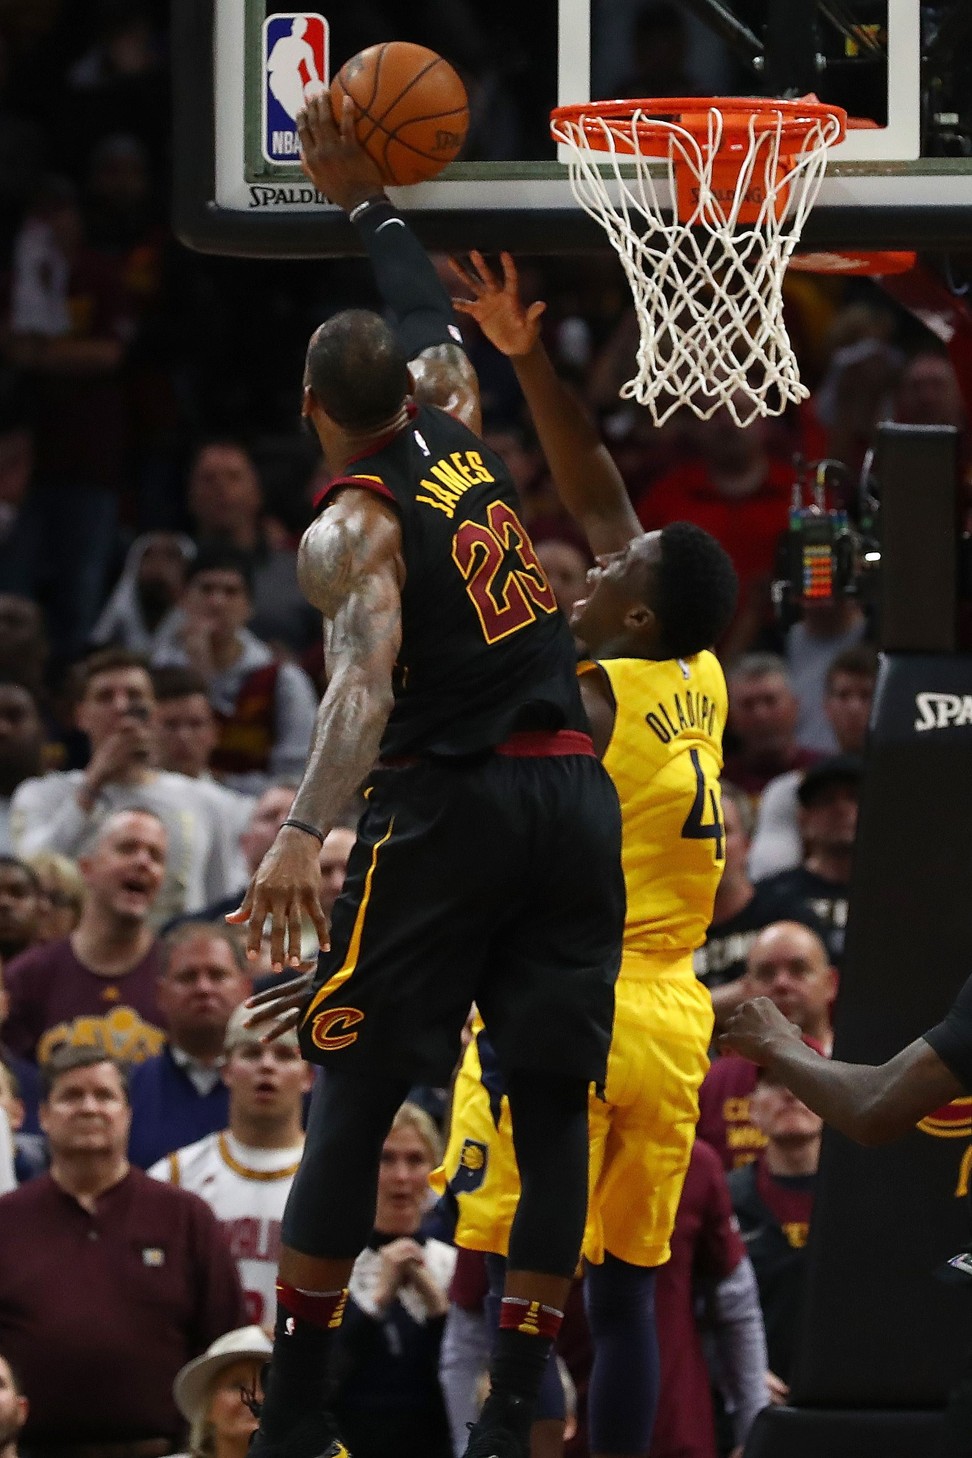 LeBron James blocks Victor Oladipo’s shot late in the game. Photo: AFP